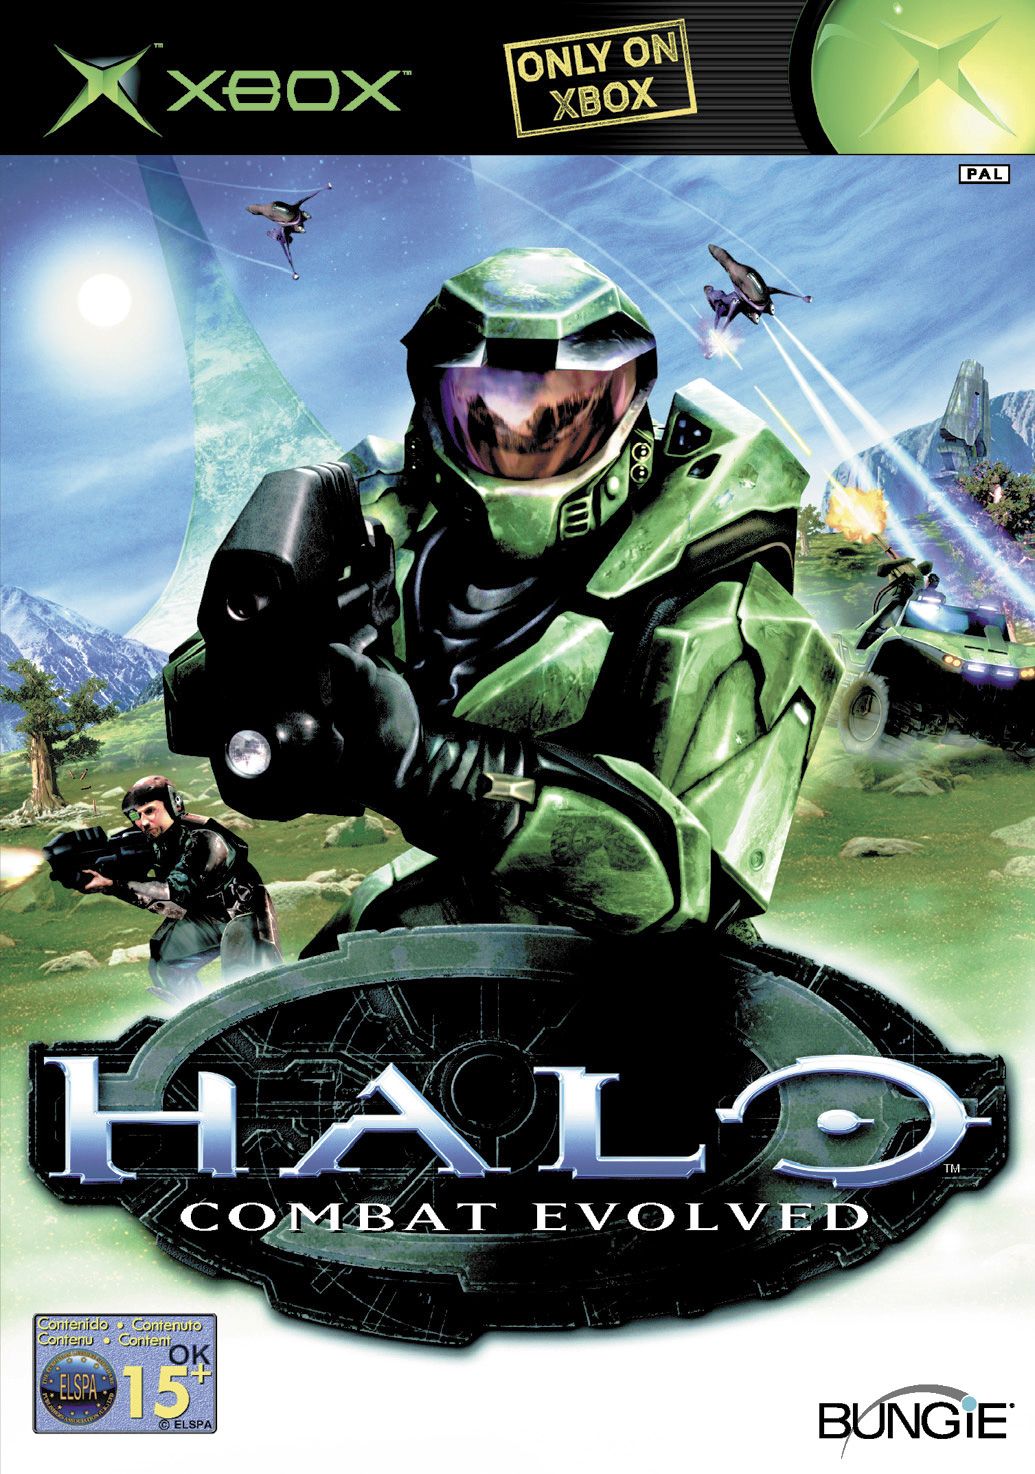 Halo combat evolved map - litoposters